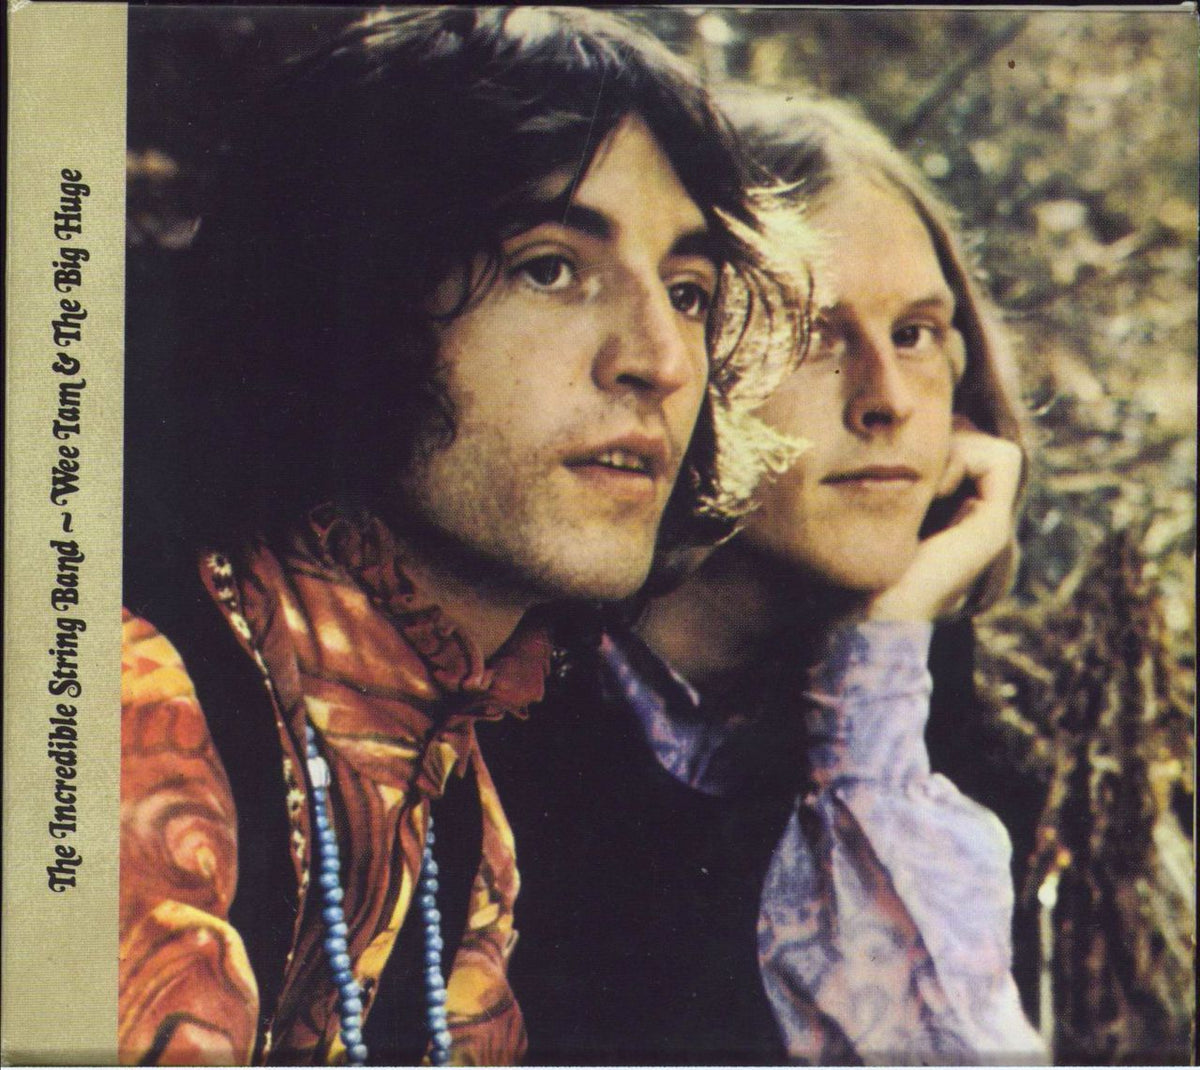 The Incredible String Band Wee Tam & The Big Huge: Deluxe Edition UK 2 ...